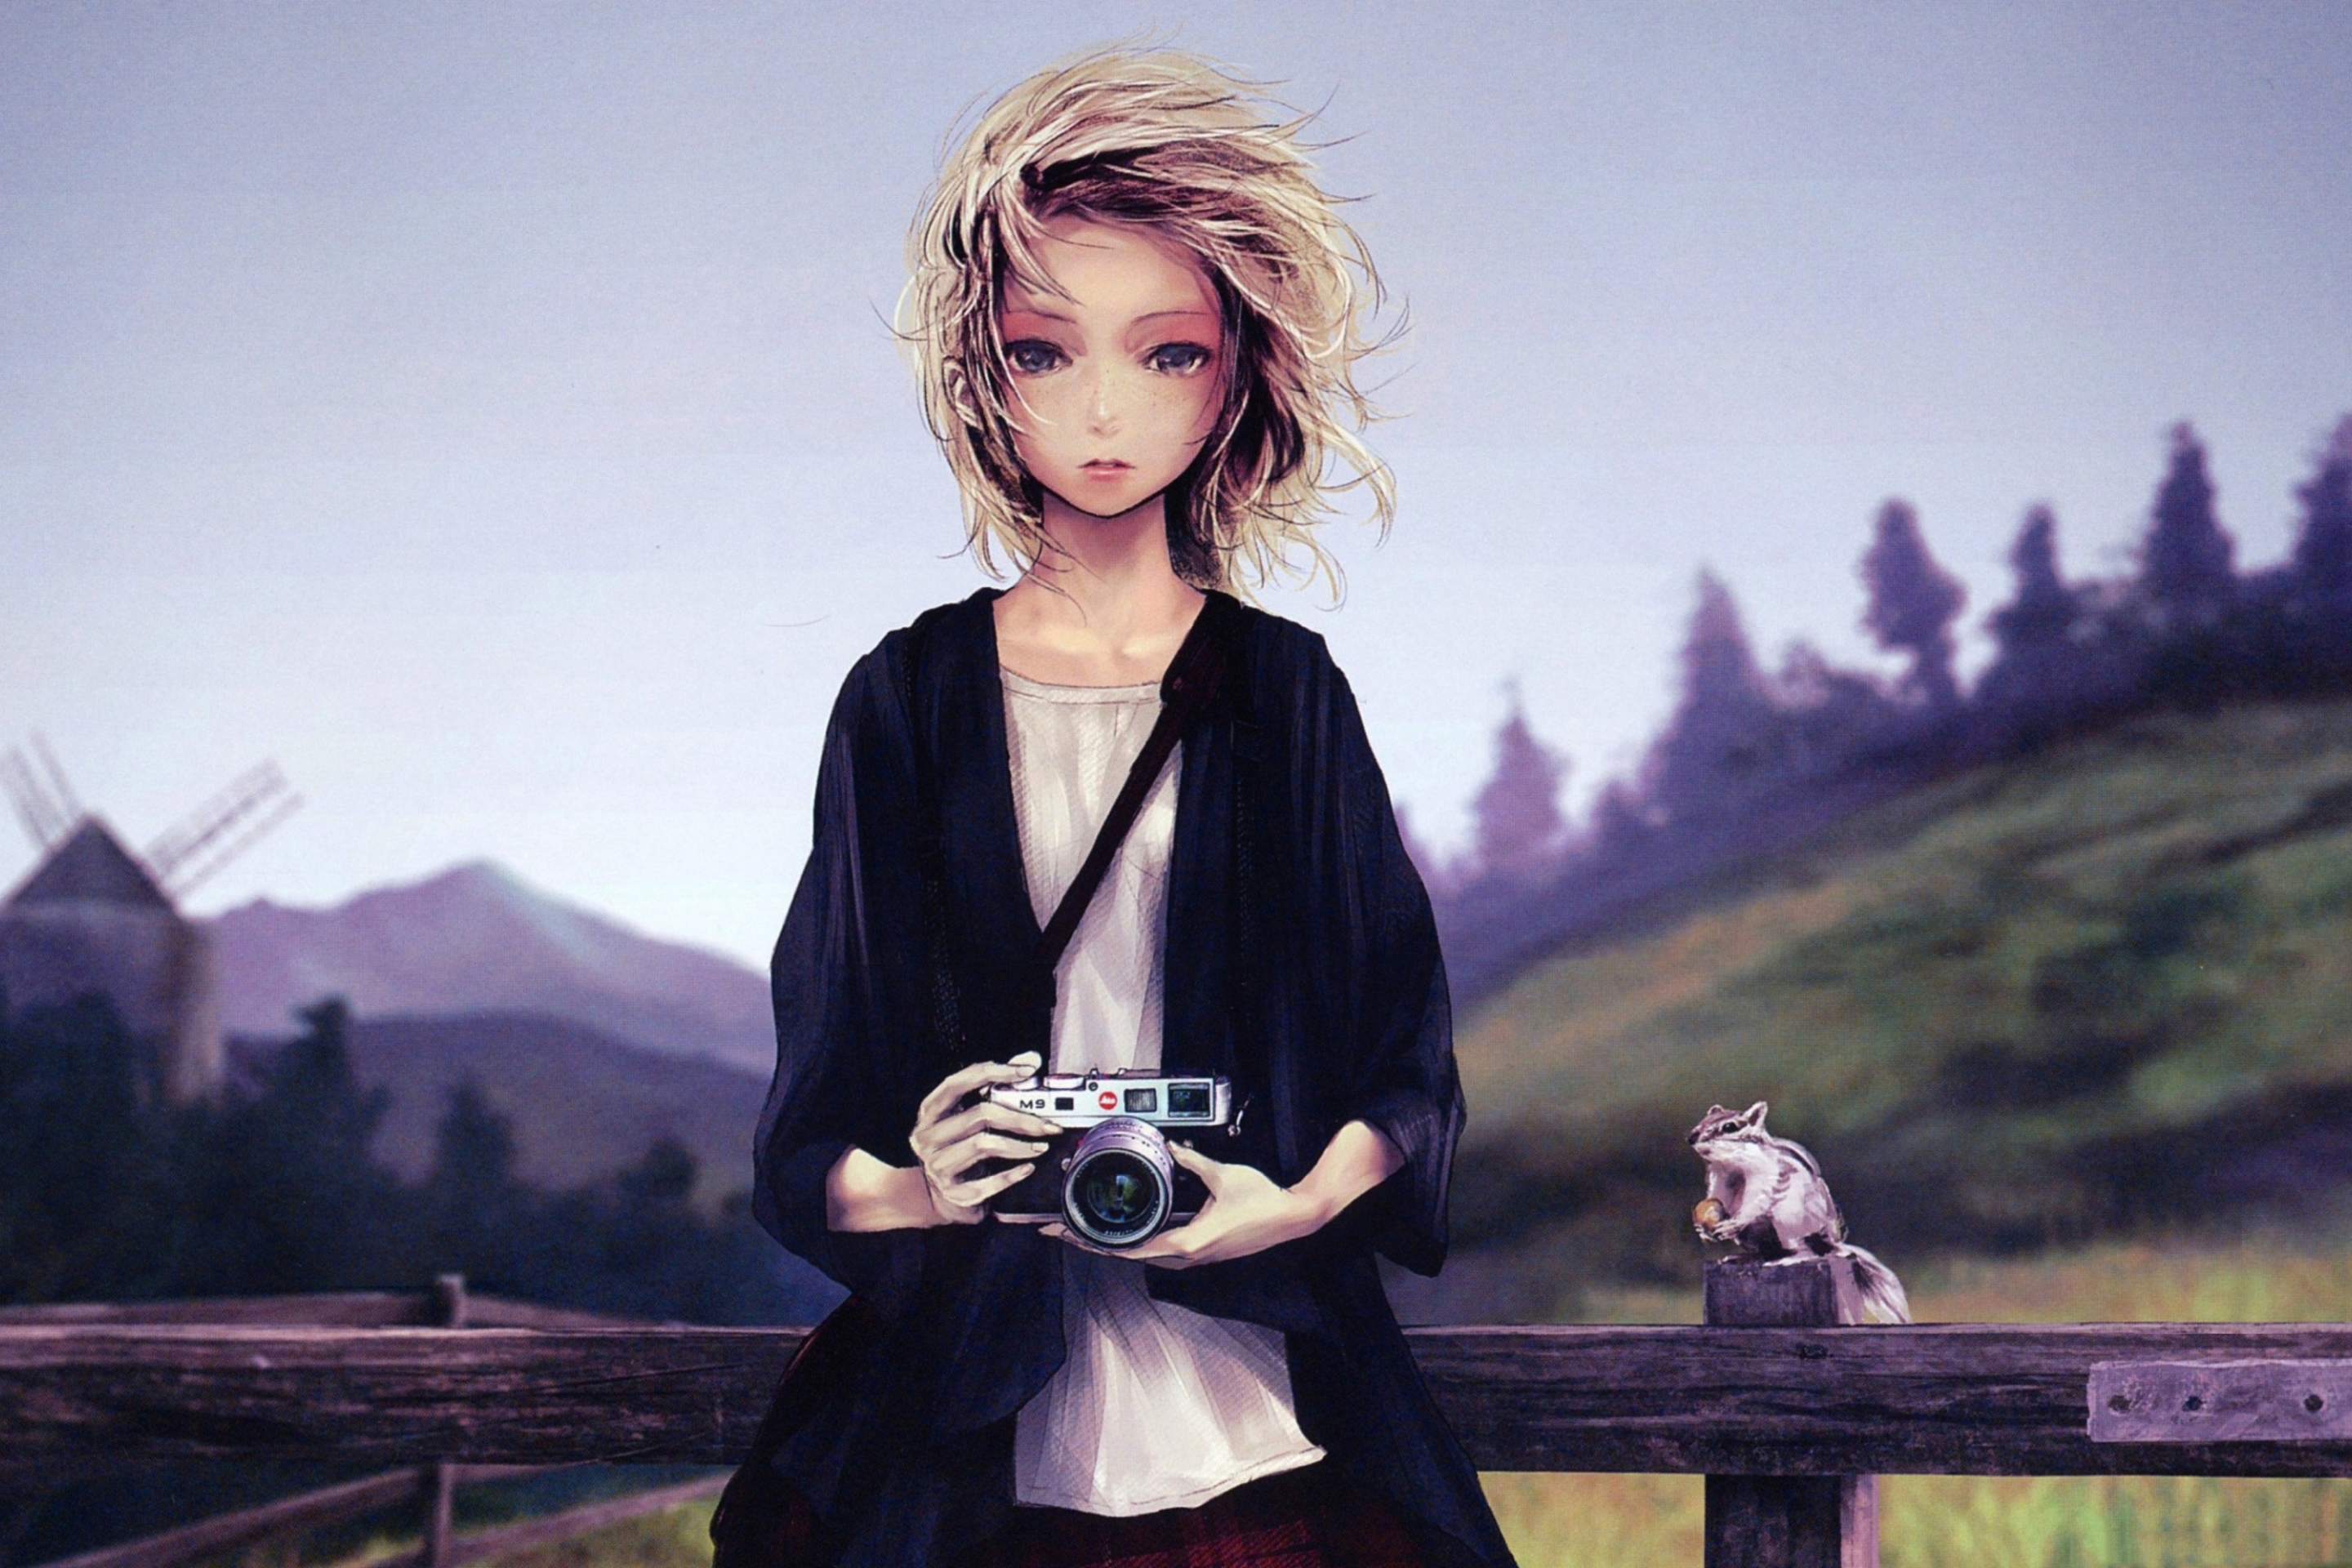 Girl With Photo Camera wallpaper 2880x1920